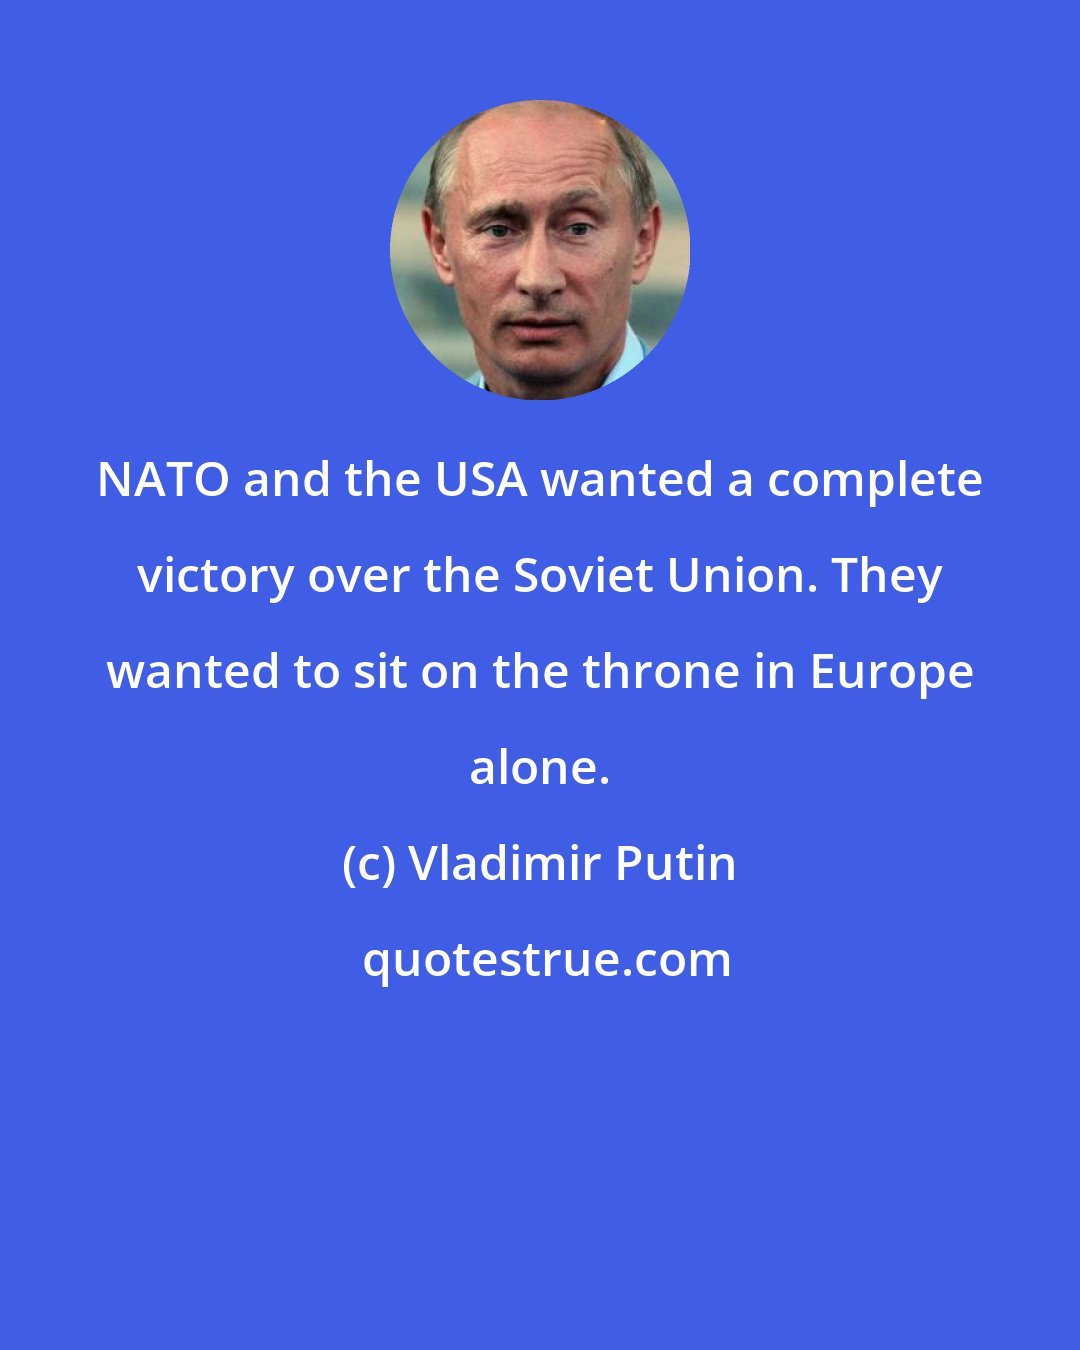 Vladimir Putin: NATO and the USA wanted a complete victory over the Soviet Union. They wanted to sit on the throne in Europe alone.